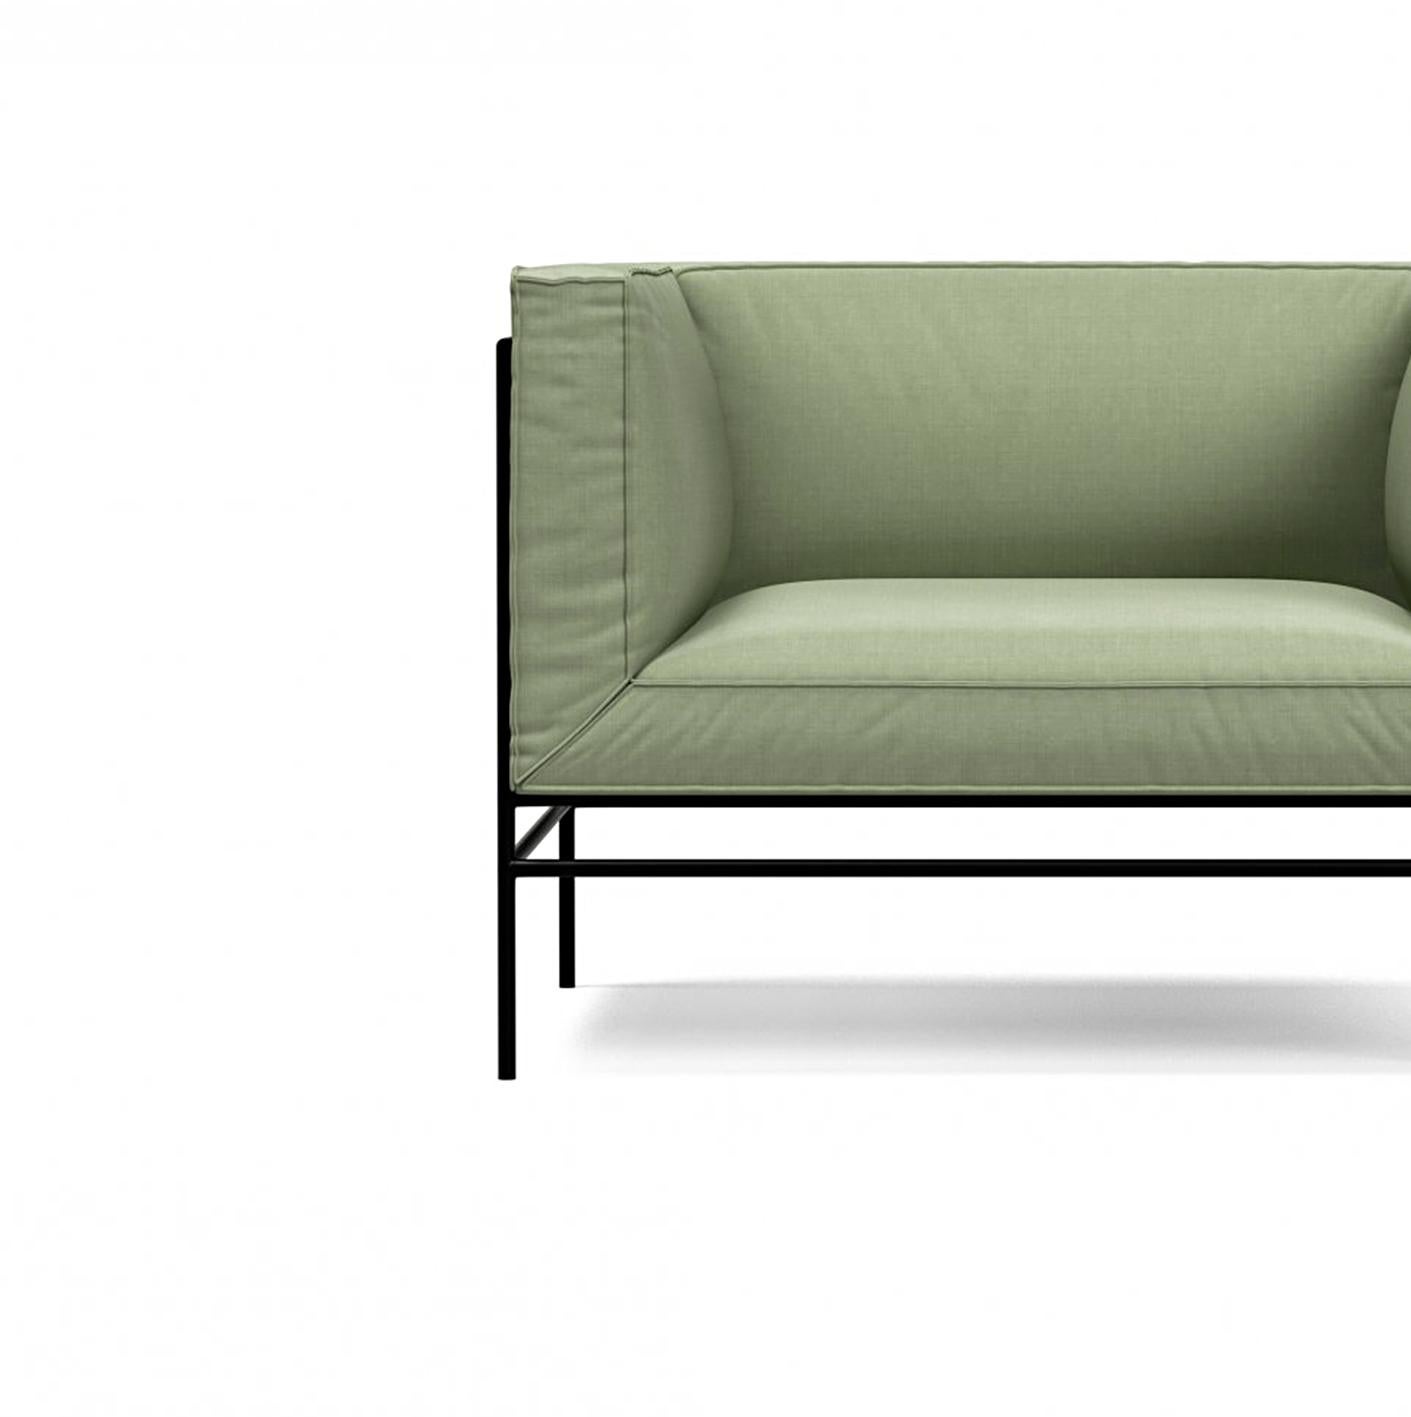 'Middleweight' armchair by Michael Anastassiades for Karakter.

Middleweight is Michael Anastassiades’ very first upholstered piece of furniture. The piece captures the best of two worlds, the Italian super lounge sofa on one side and the compact